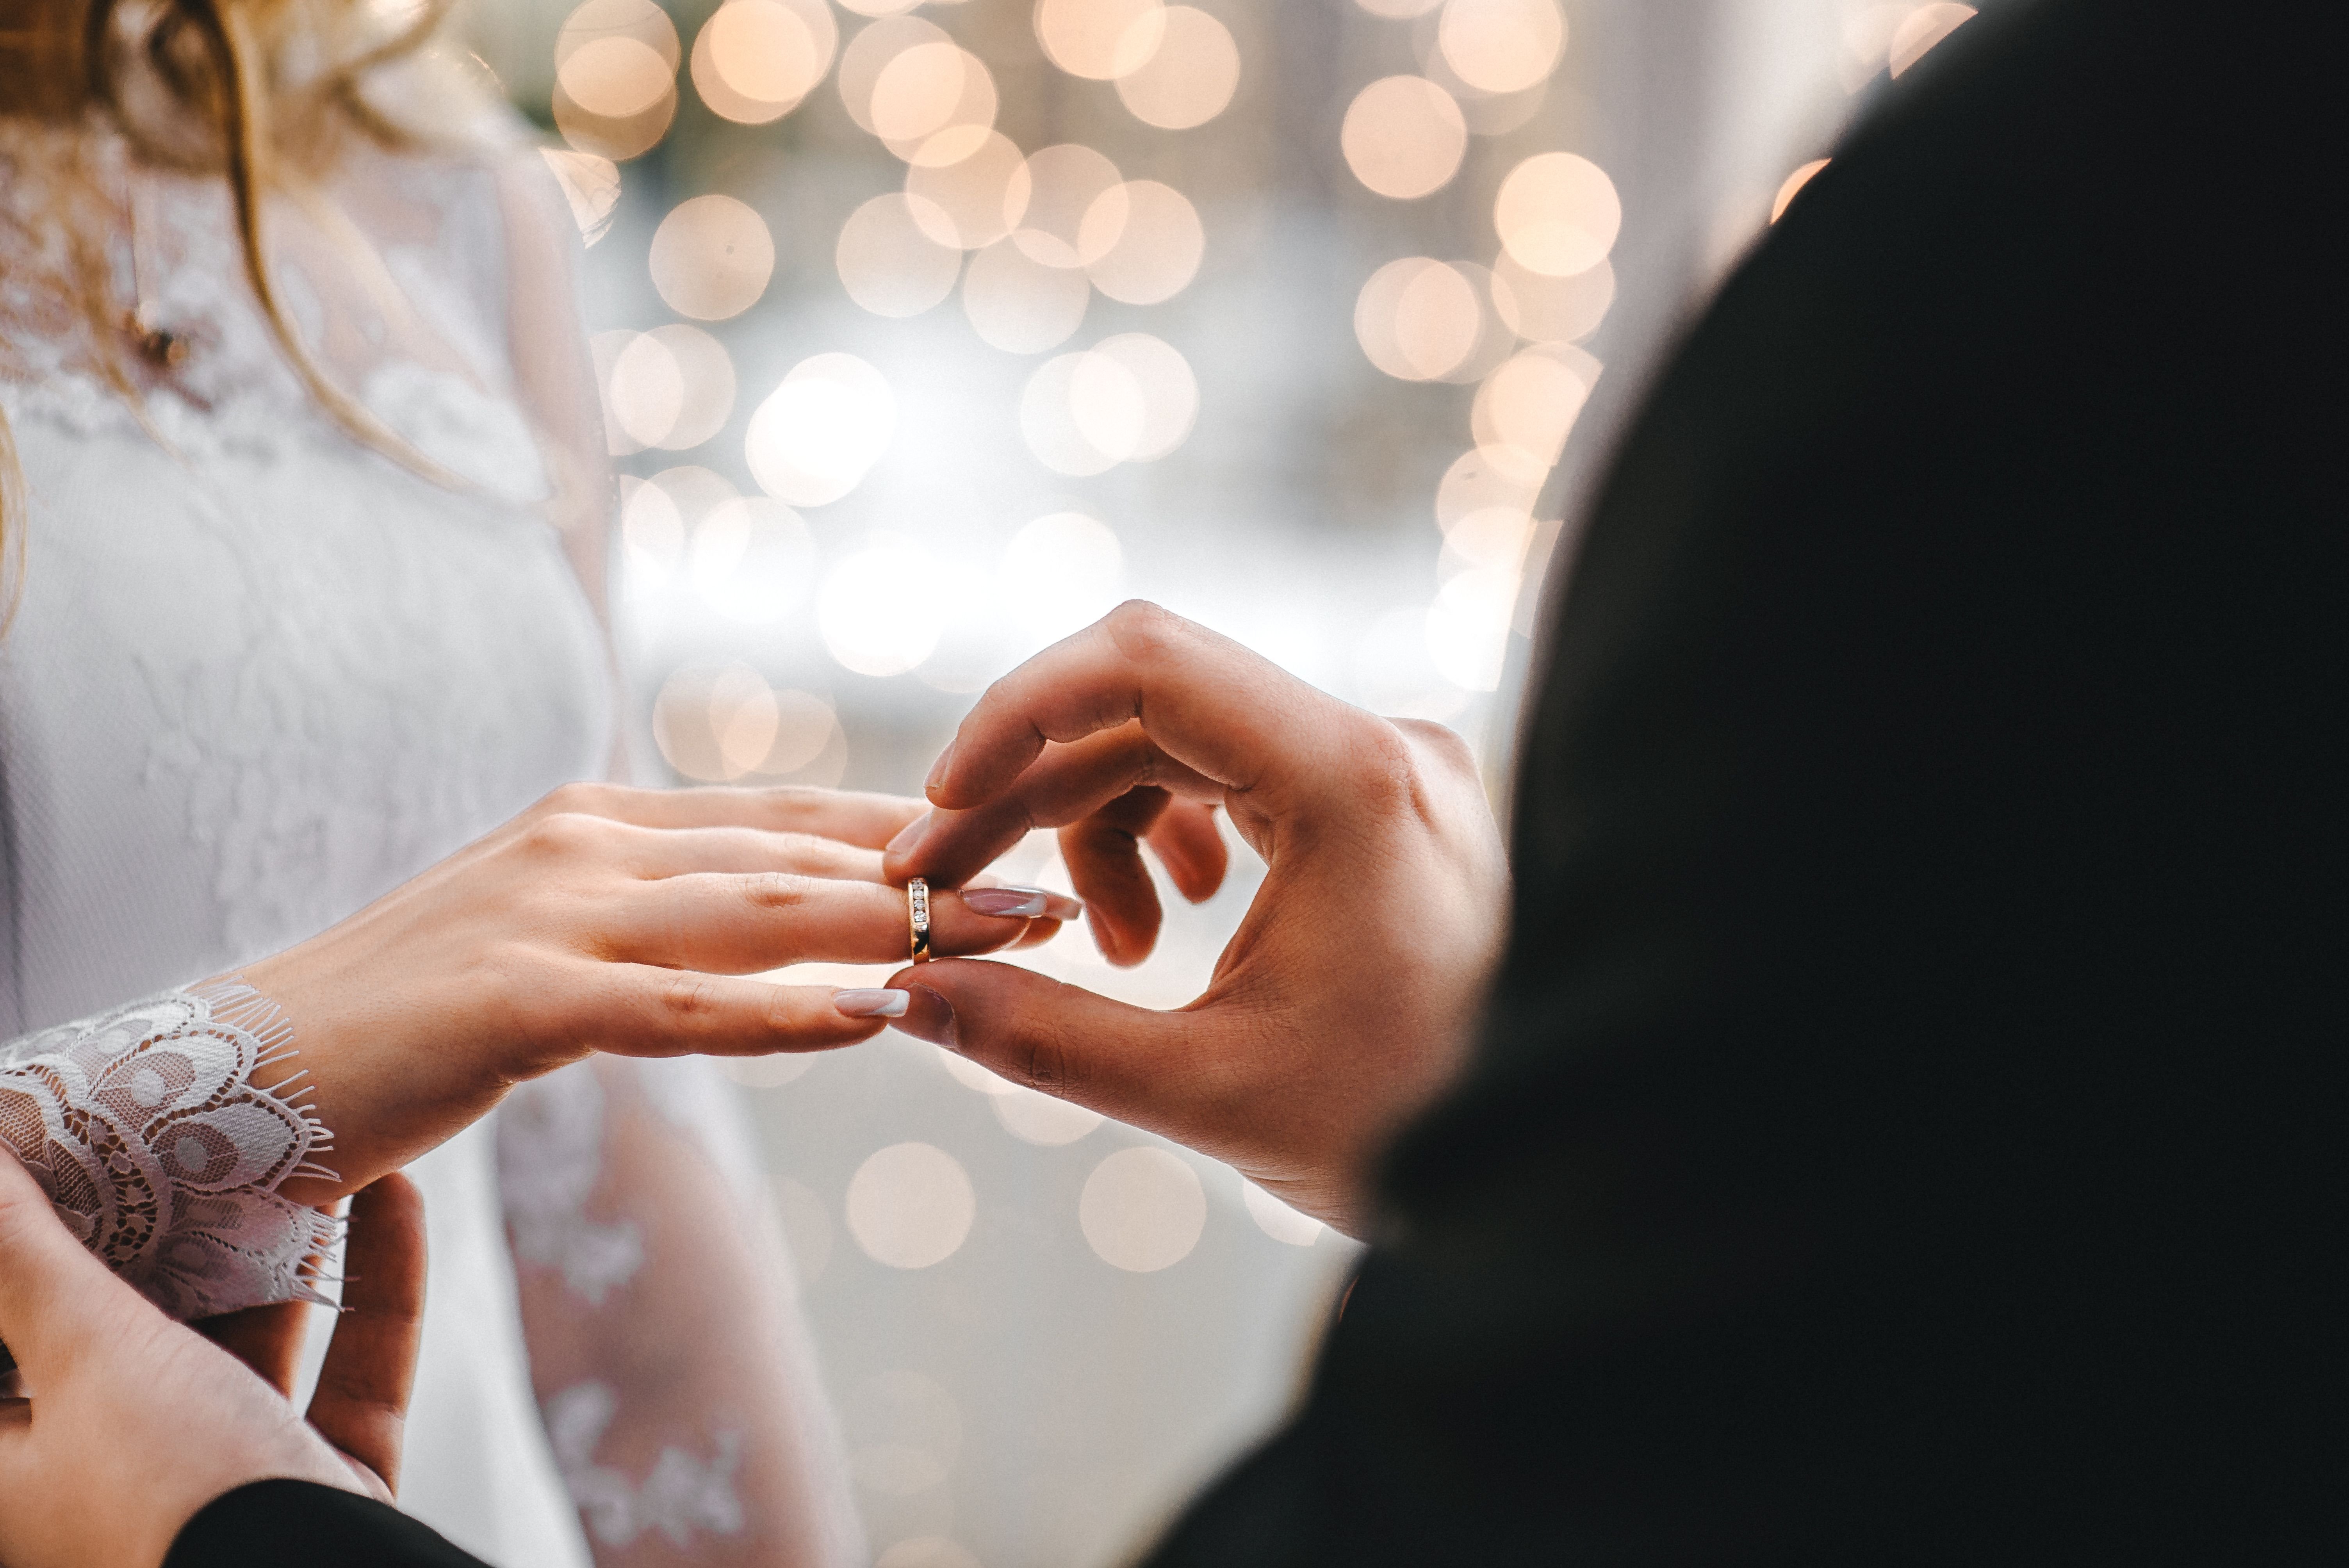 Man placing wedding ring on woman's finger. | Source: Shutterstock  